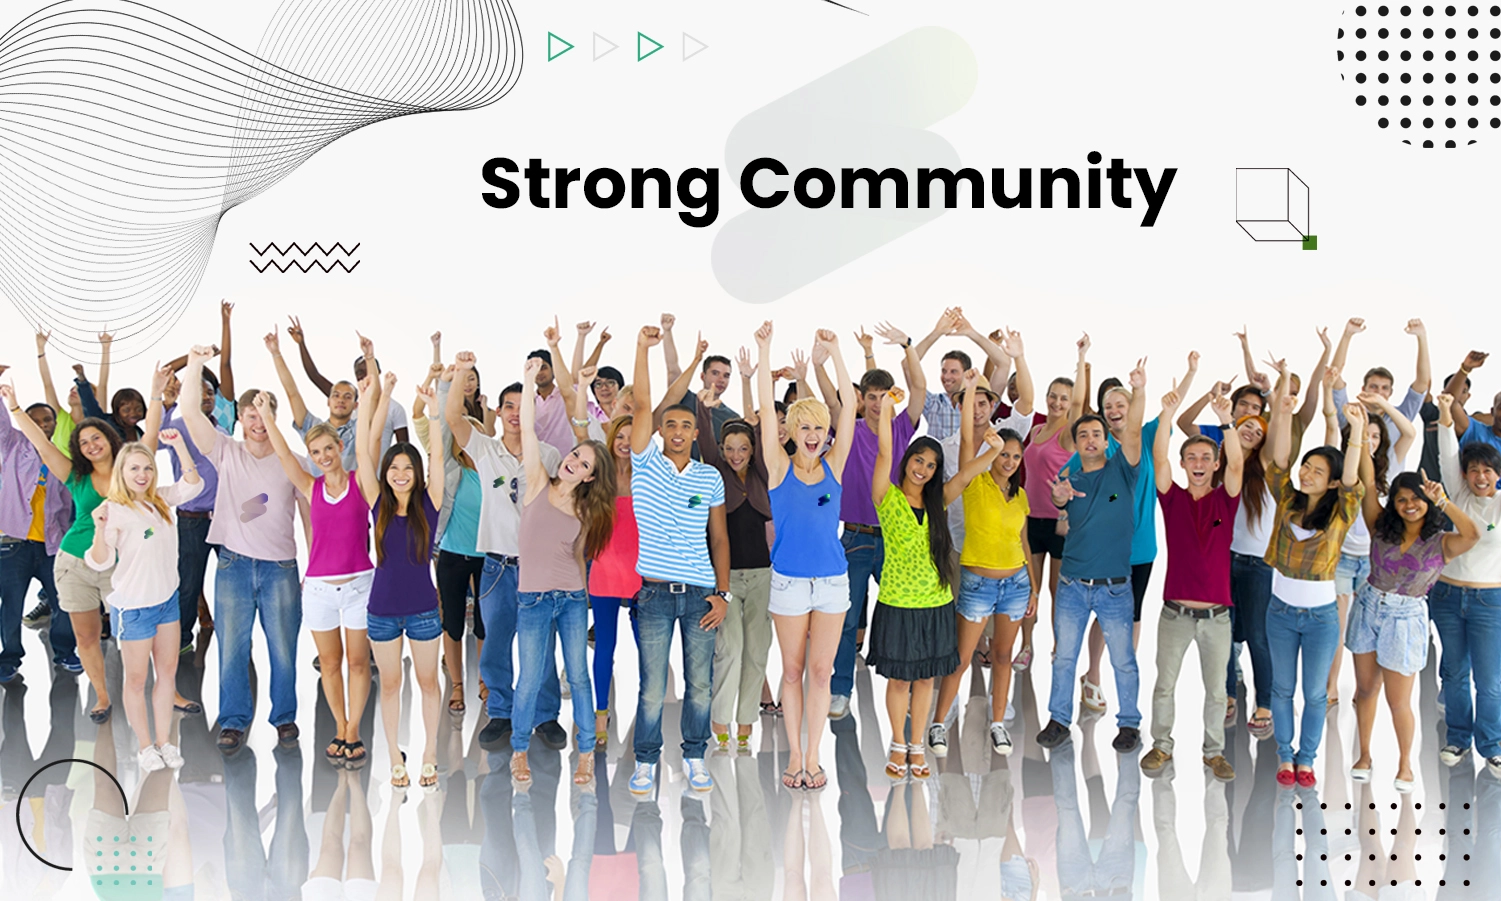 The Power of building a strong community lies in your hands: Learn how?